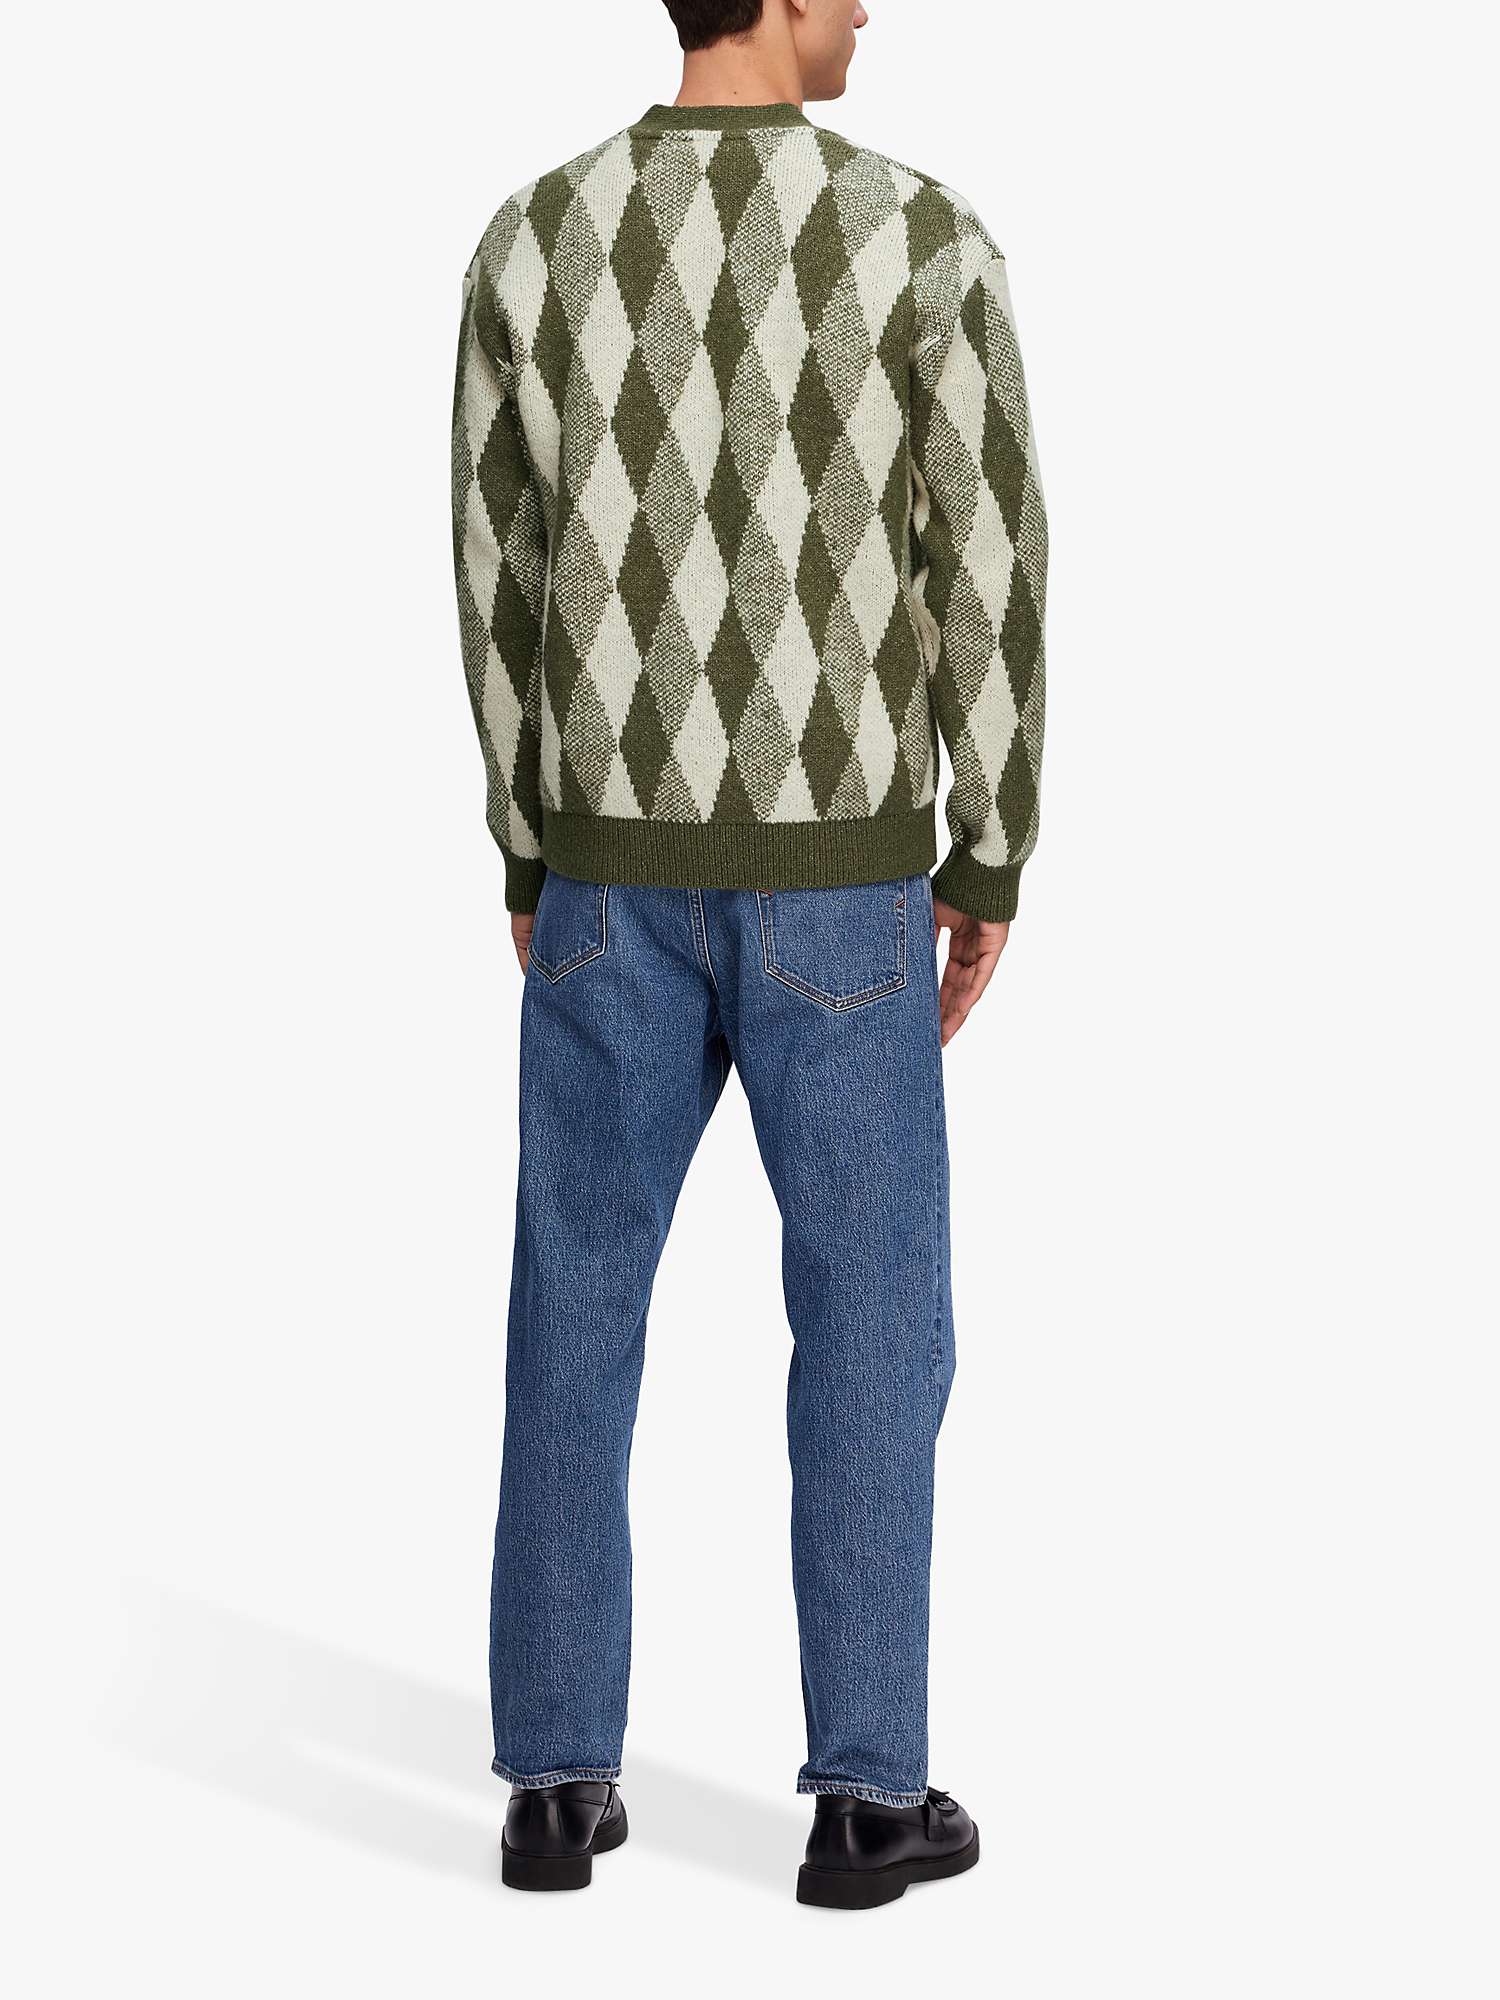 Buy SELECTED HOMME Knitted Long Sleeve Cardigan, Green/Multi Online at johnlewis.com